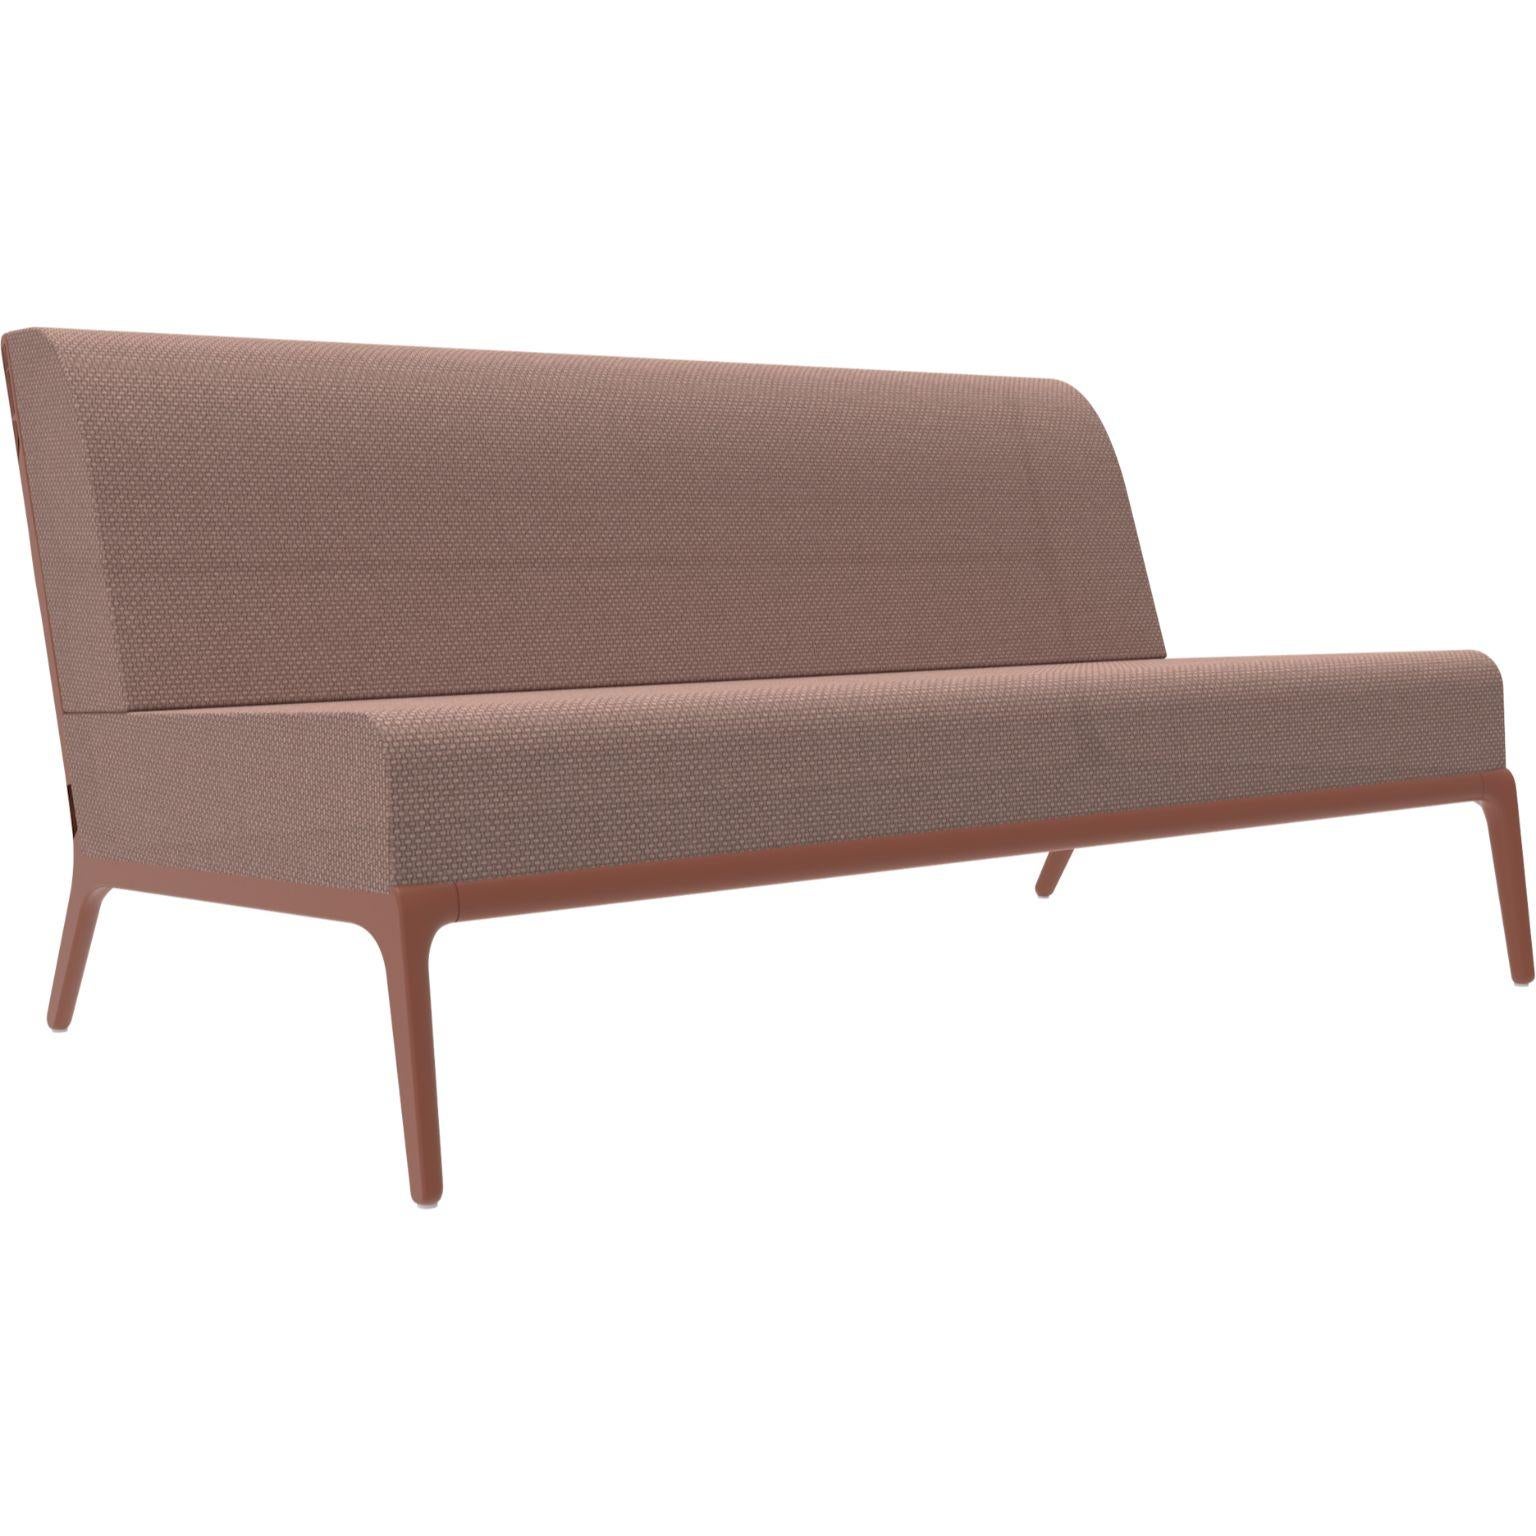 Xaloc central 160 salmon modular sofa by MOWEE
Dimensions: D100 x W160 x H81 cm (Seat Height 42cm)
Material: Aluminium, Textile
Weight: 35.5 kg
Also Available in different colours and finishes. 

 Xaloc synthesizes the lines of interior